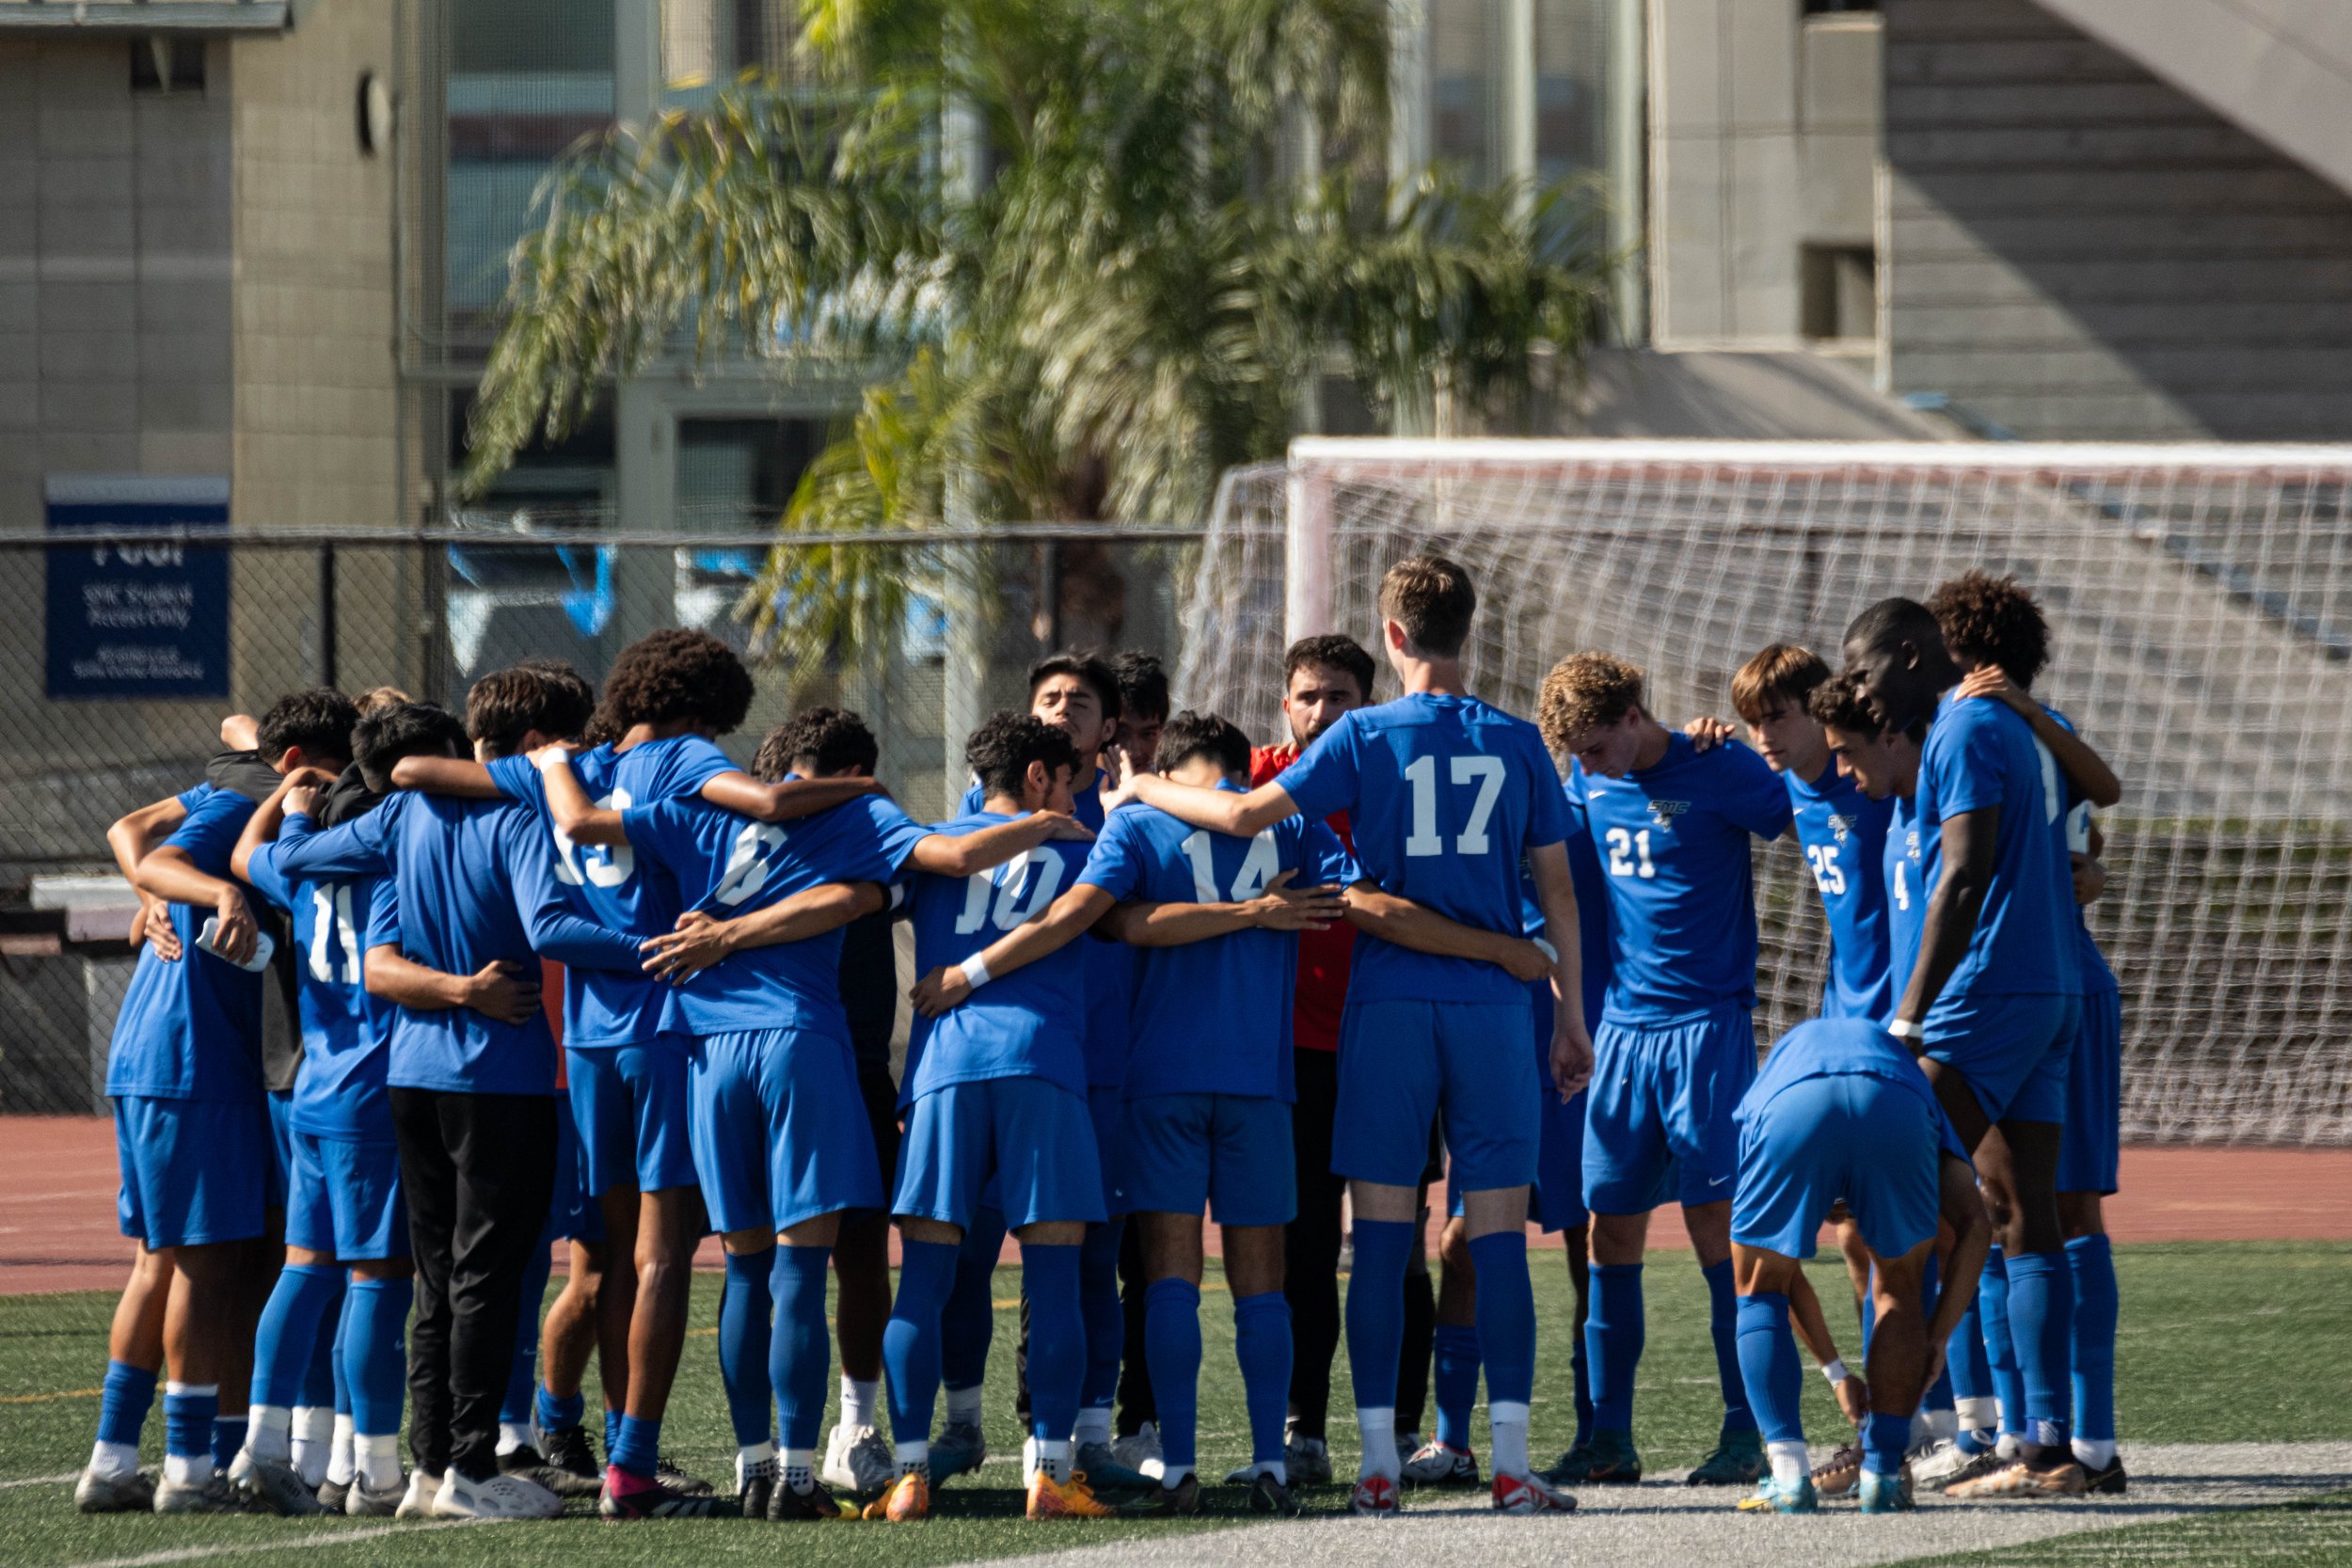  Santa Monica College Corsairs Men's Soccer squad huddling before the start of the match were they faced off the Renegades from Bakersfield College on Tues, Oct. 3. Corsairs would go and shutout the Renegades with a score of 3-0 at Corsair Field in S